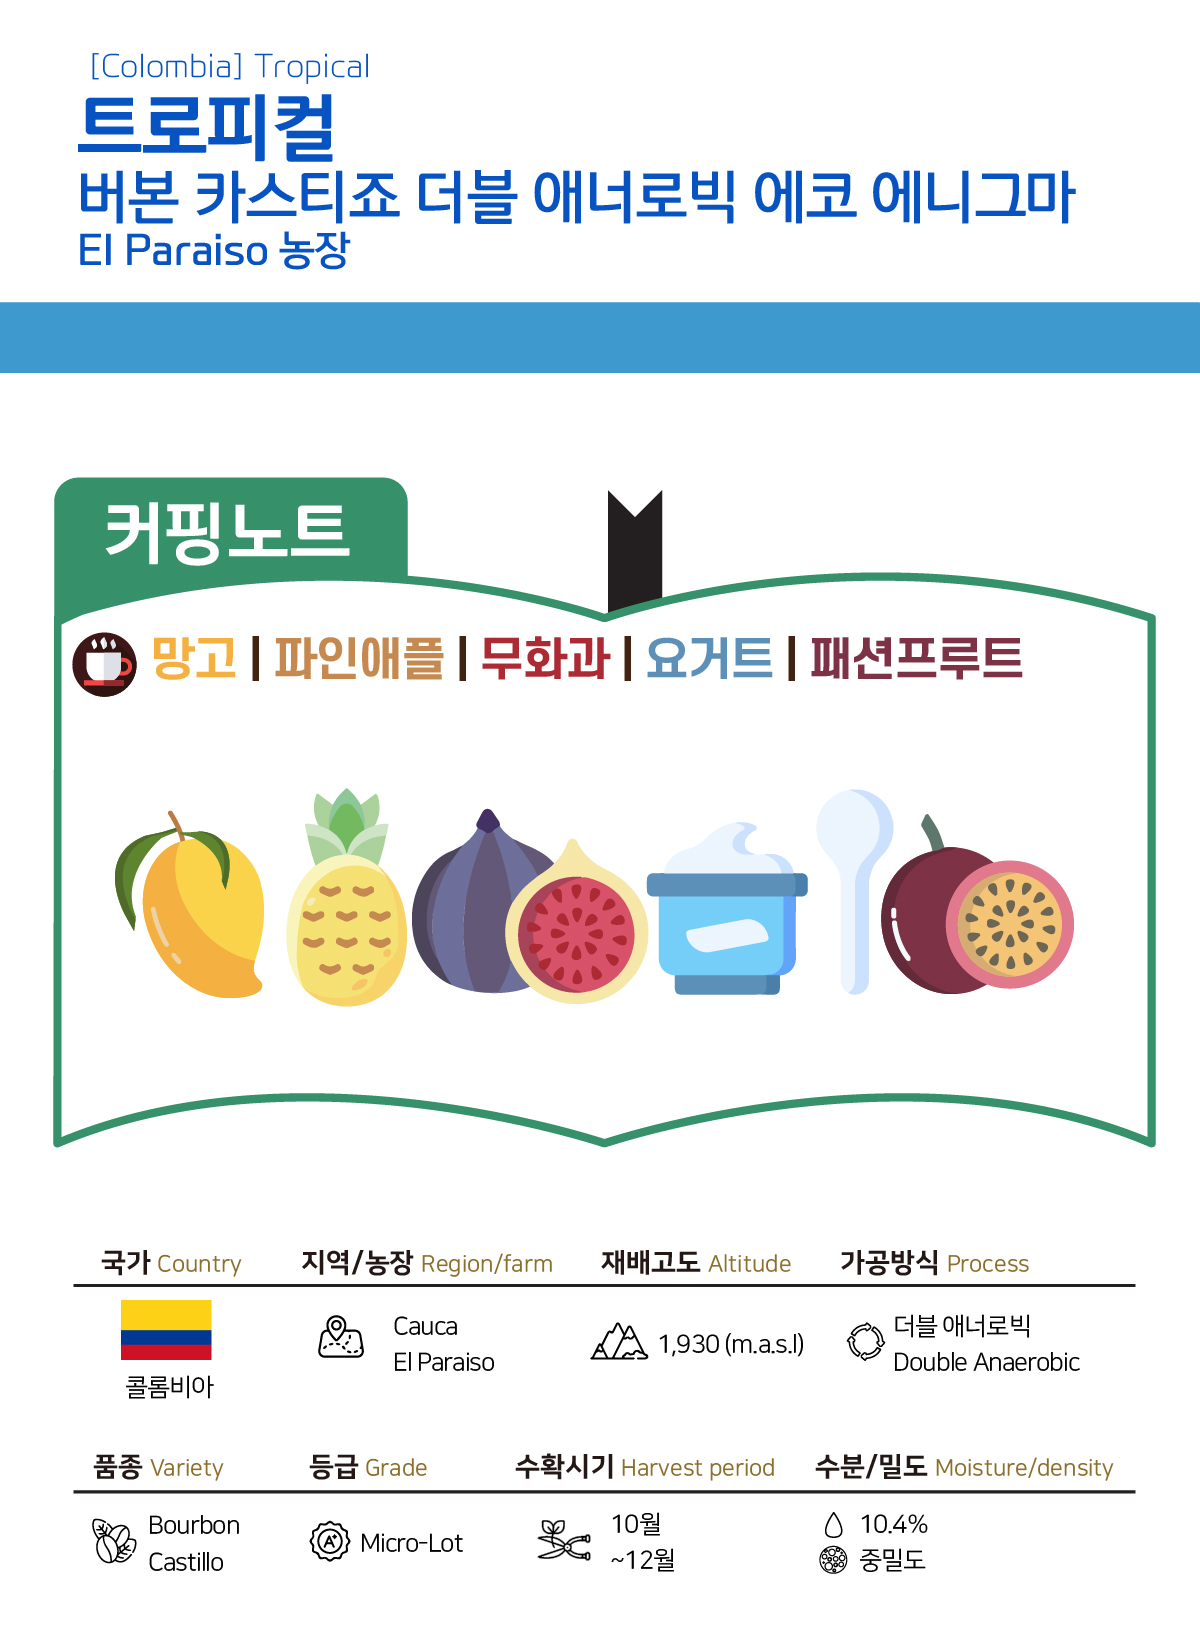 [Colombia] 엘 파라이소 트로피컬